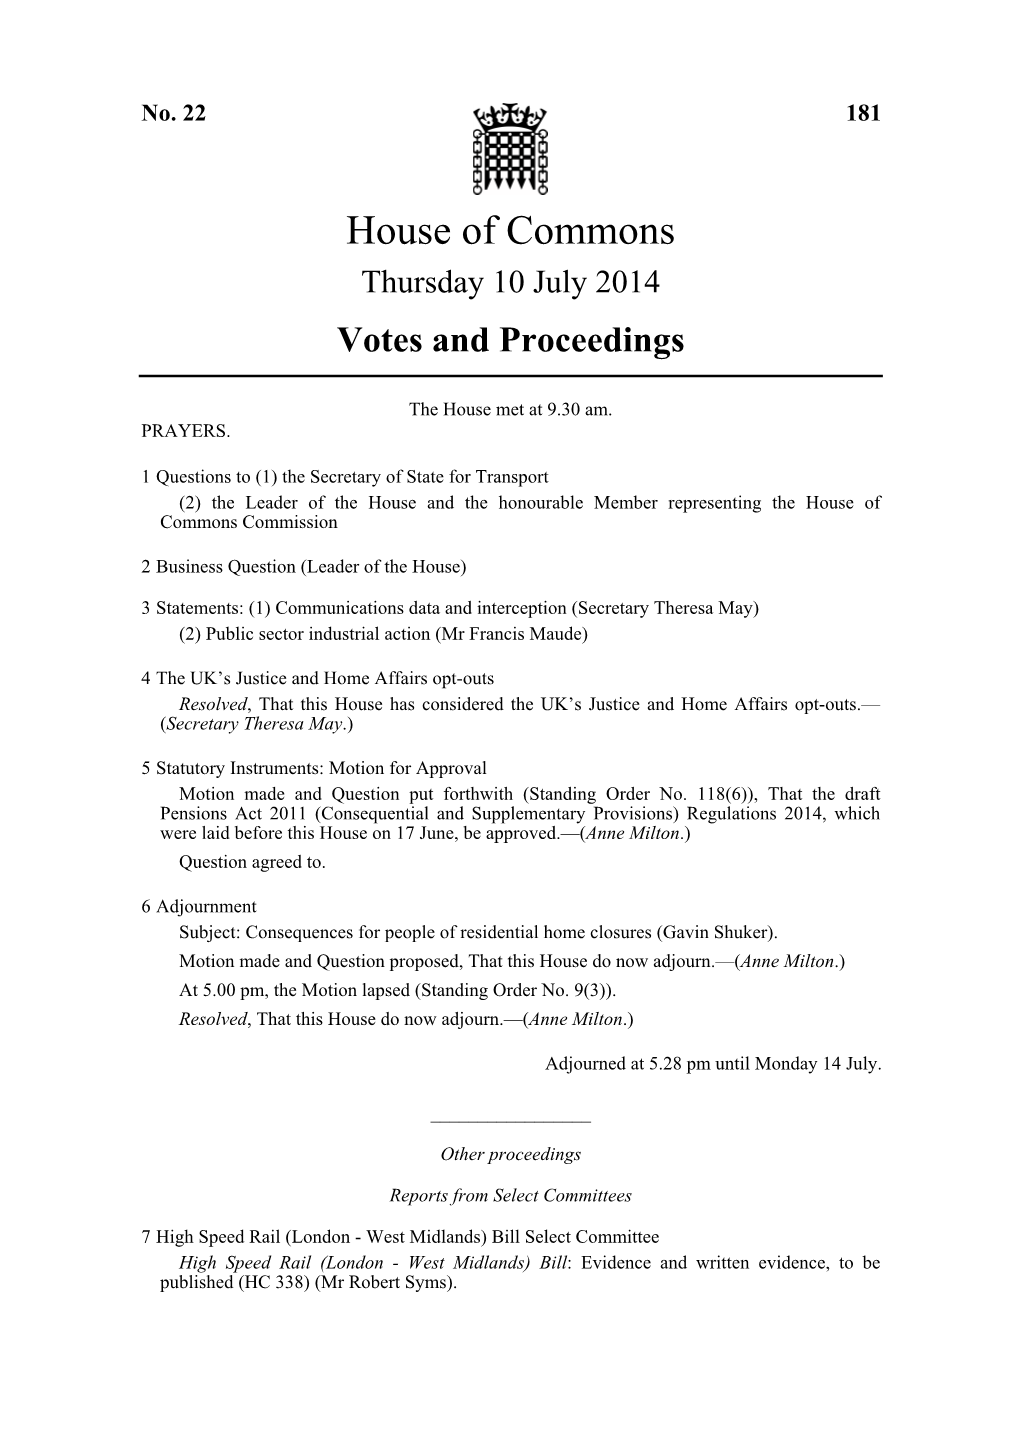 House of Commons Thursday 10 July 2014 Votes and Proceedings